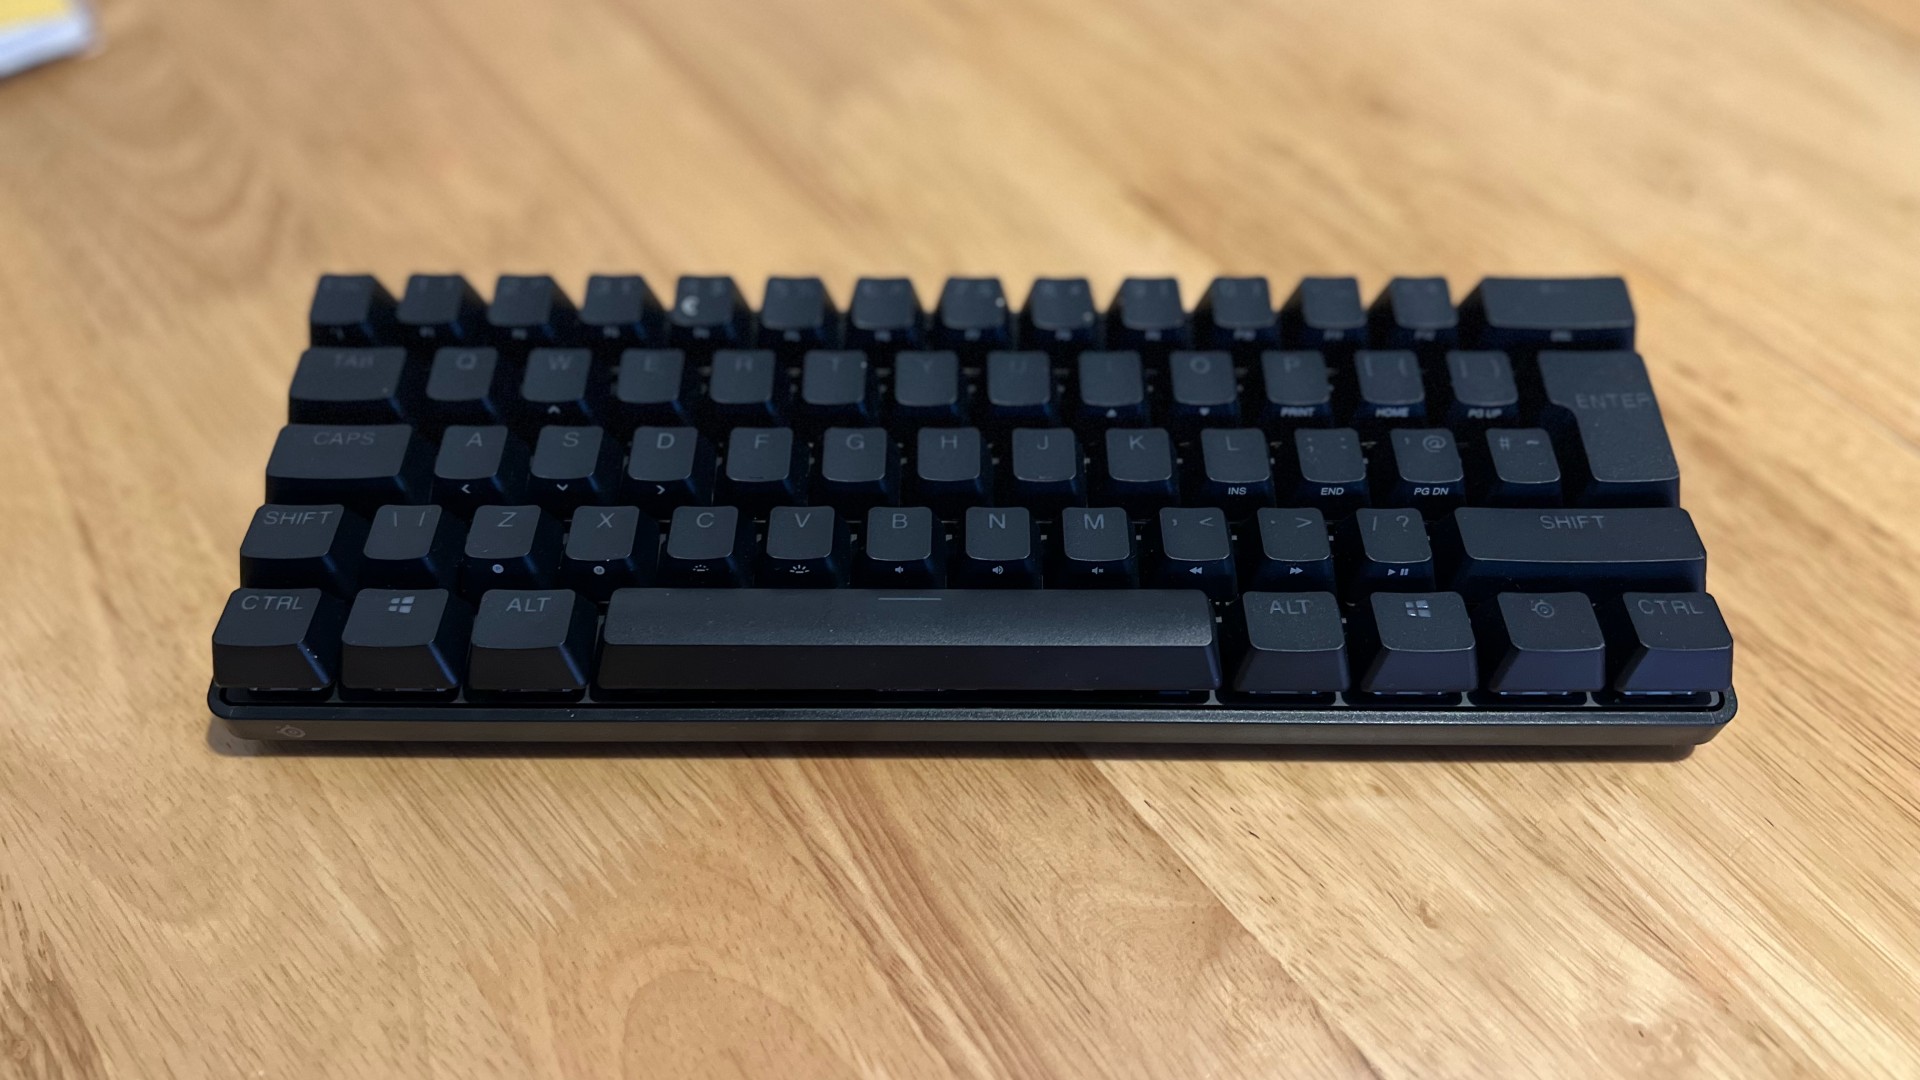 SteelSeries Apex Pro Mini review: a new world of adjustable switches - but  not for everyone